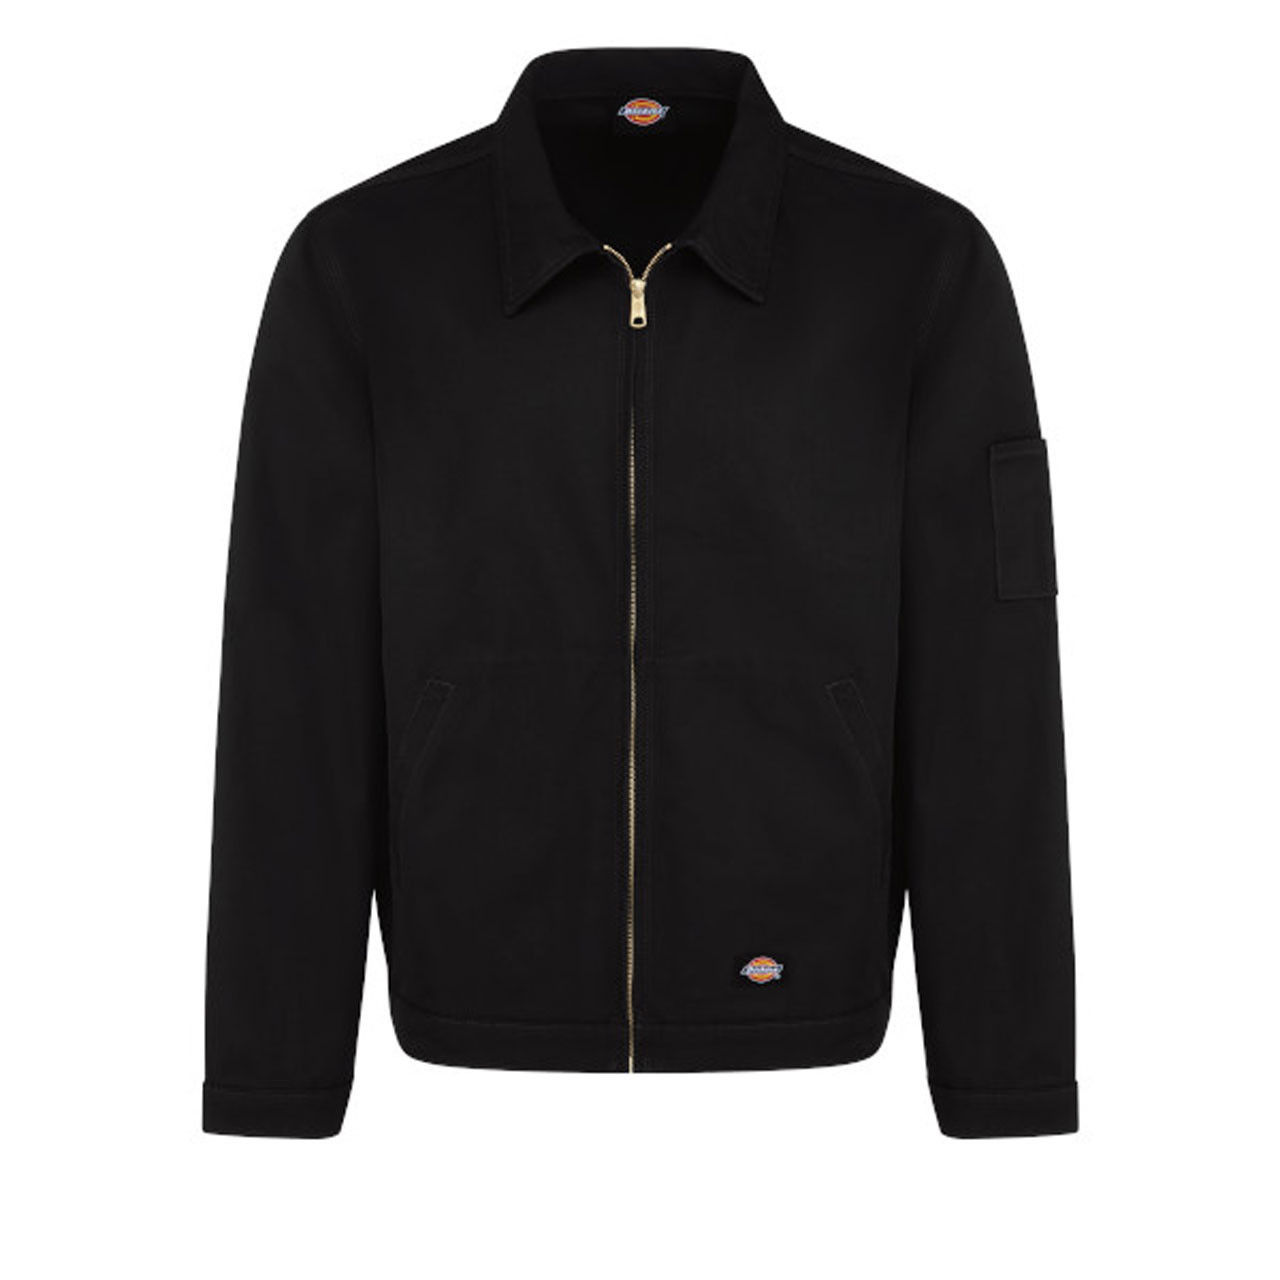 What color is the Dickies Unlined Industrial Eisenhower Jacket?